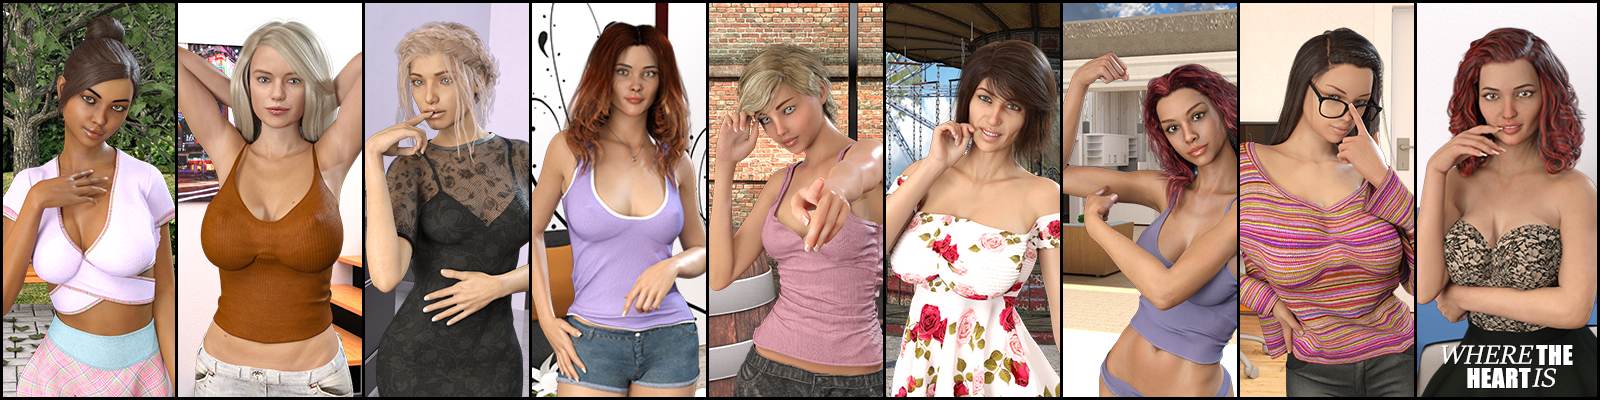 Where the Heart Is [CheekyGimp] Adult xxx Game Download